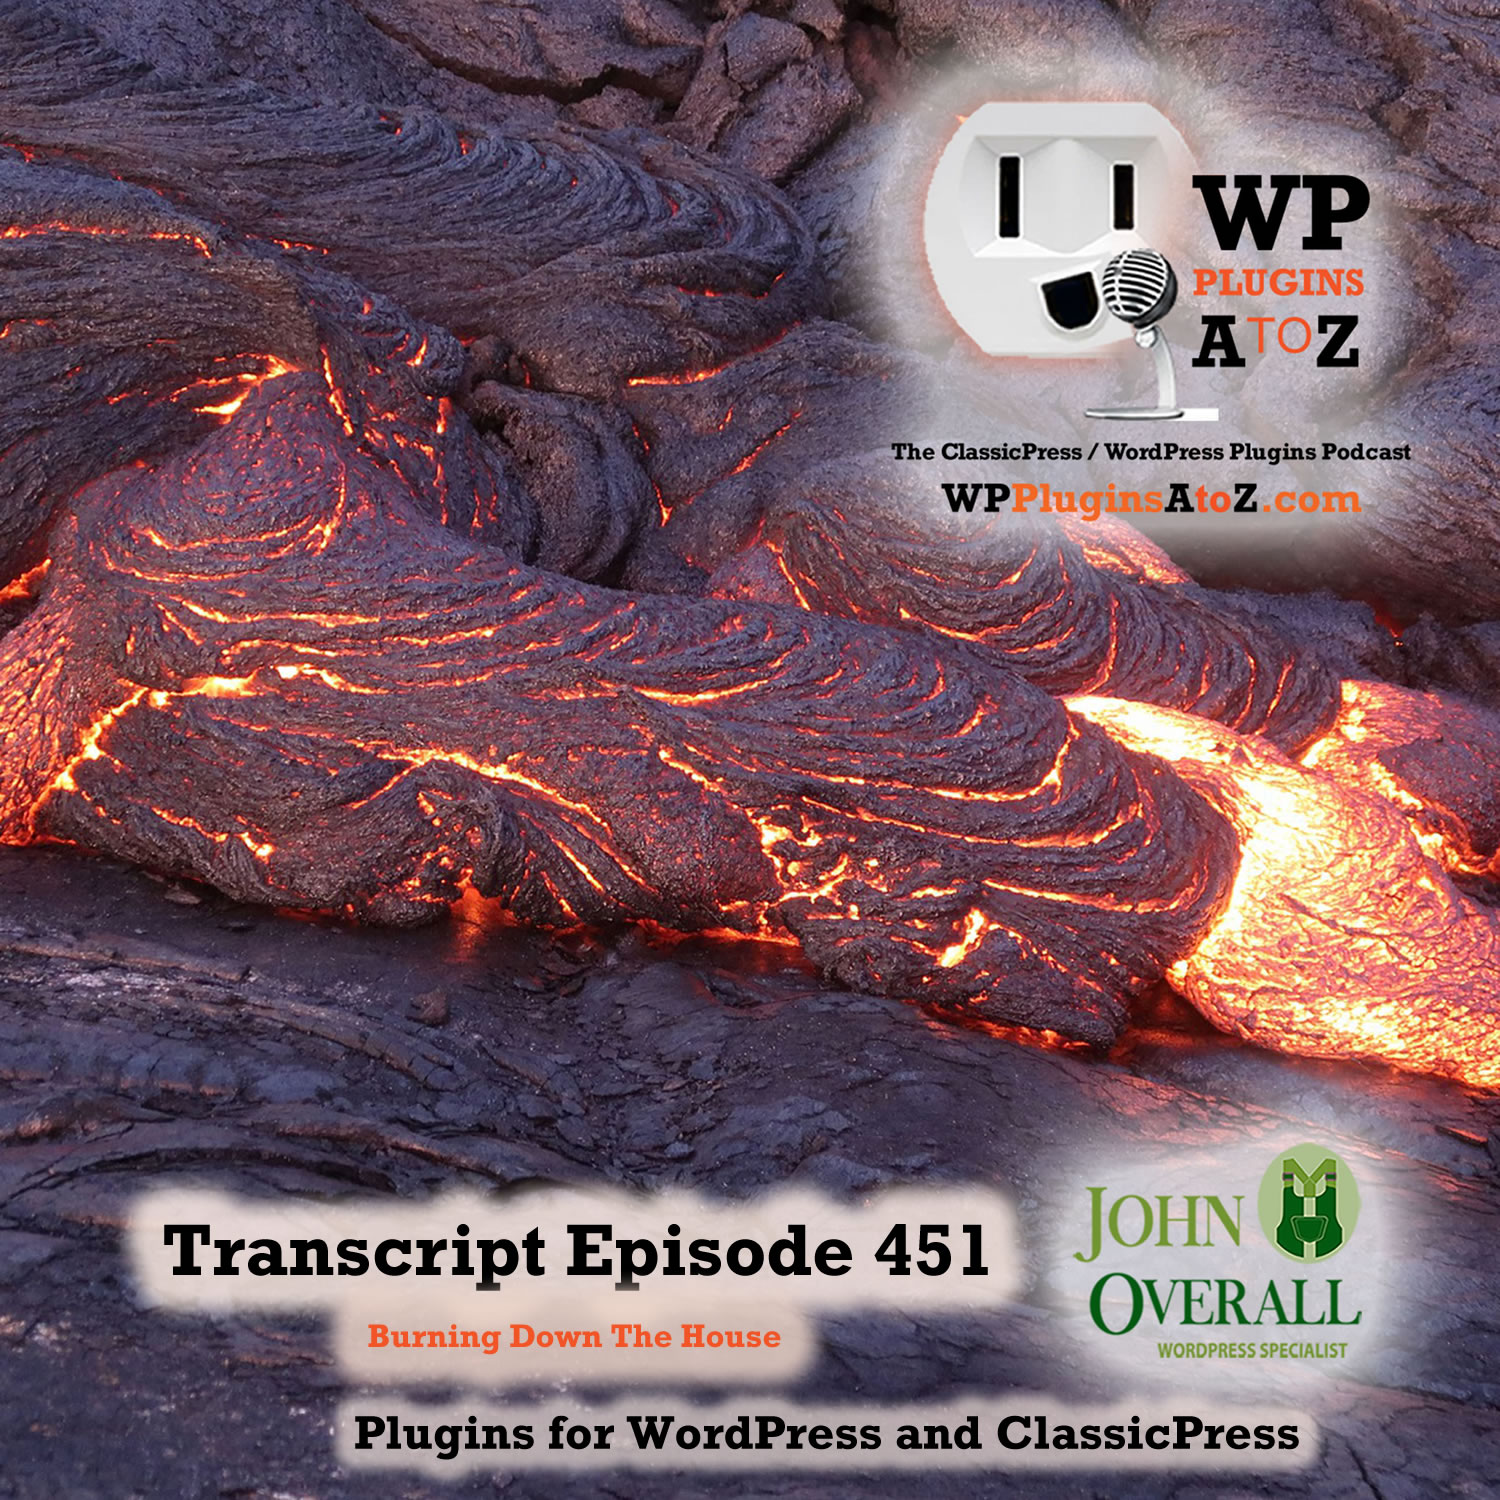 Burning Down The House Grab Your Pop-corn it's Going to be a Hell of a Show. It's Episode 451 with plugins for Stopping Access, Timing Your Content, Menus Smarter than a 5th Grader, Shortcodes for Everything, and ClassicPress Options. It's all coming up on WordPress Plugins A-Z!